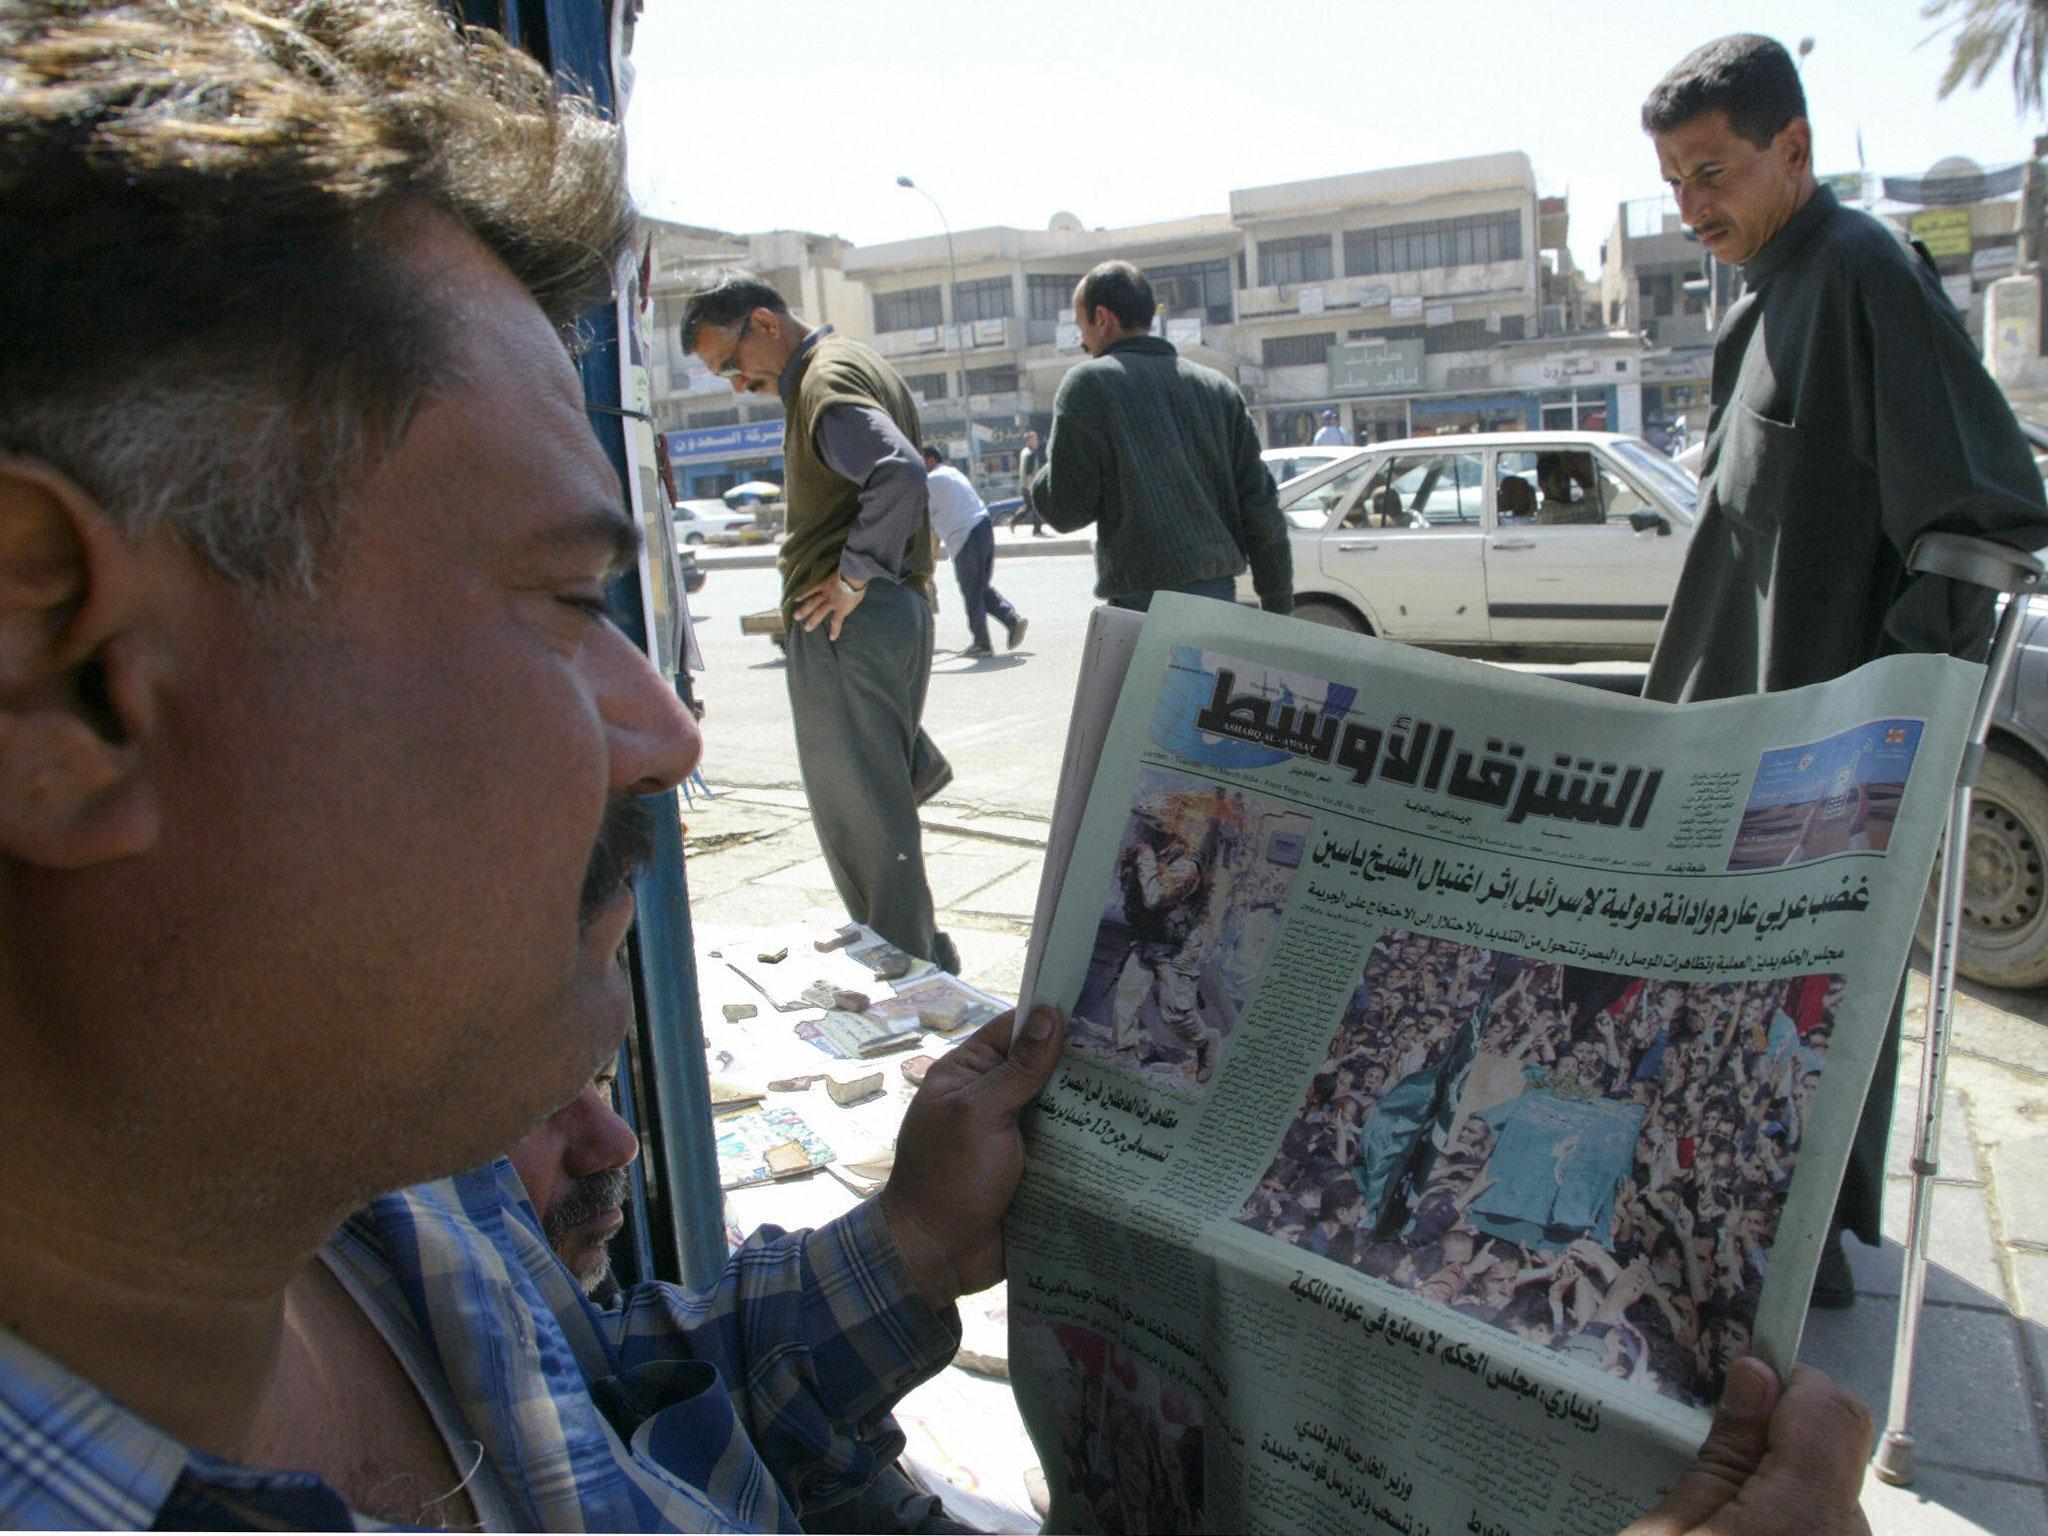 The article in the London-based pan-Arab newspaper caused an uproar in Iraq, where the prime minister and several other prominent figures issued public condemnations